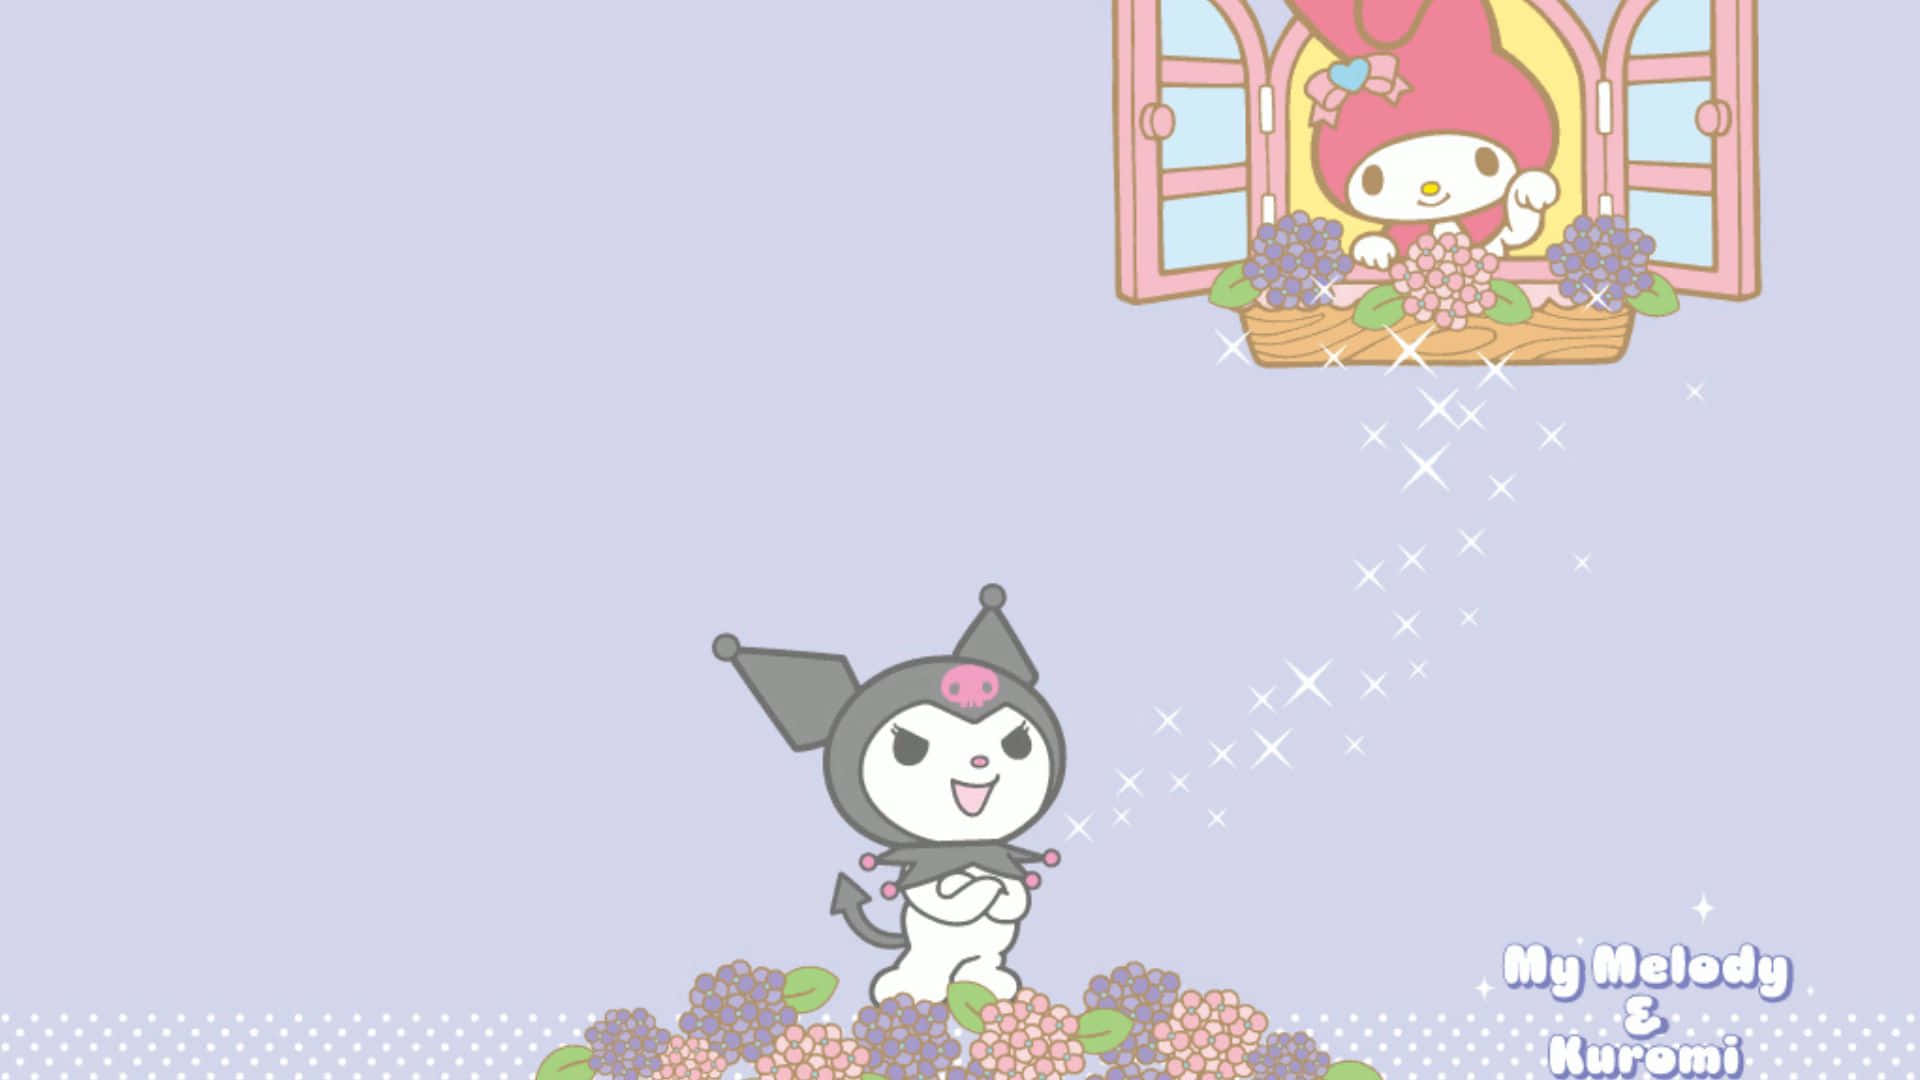 Playful Kuromi and Sweet My Melody - Friends Forever Wallpaper